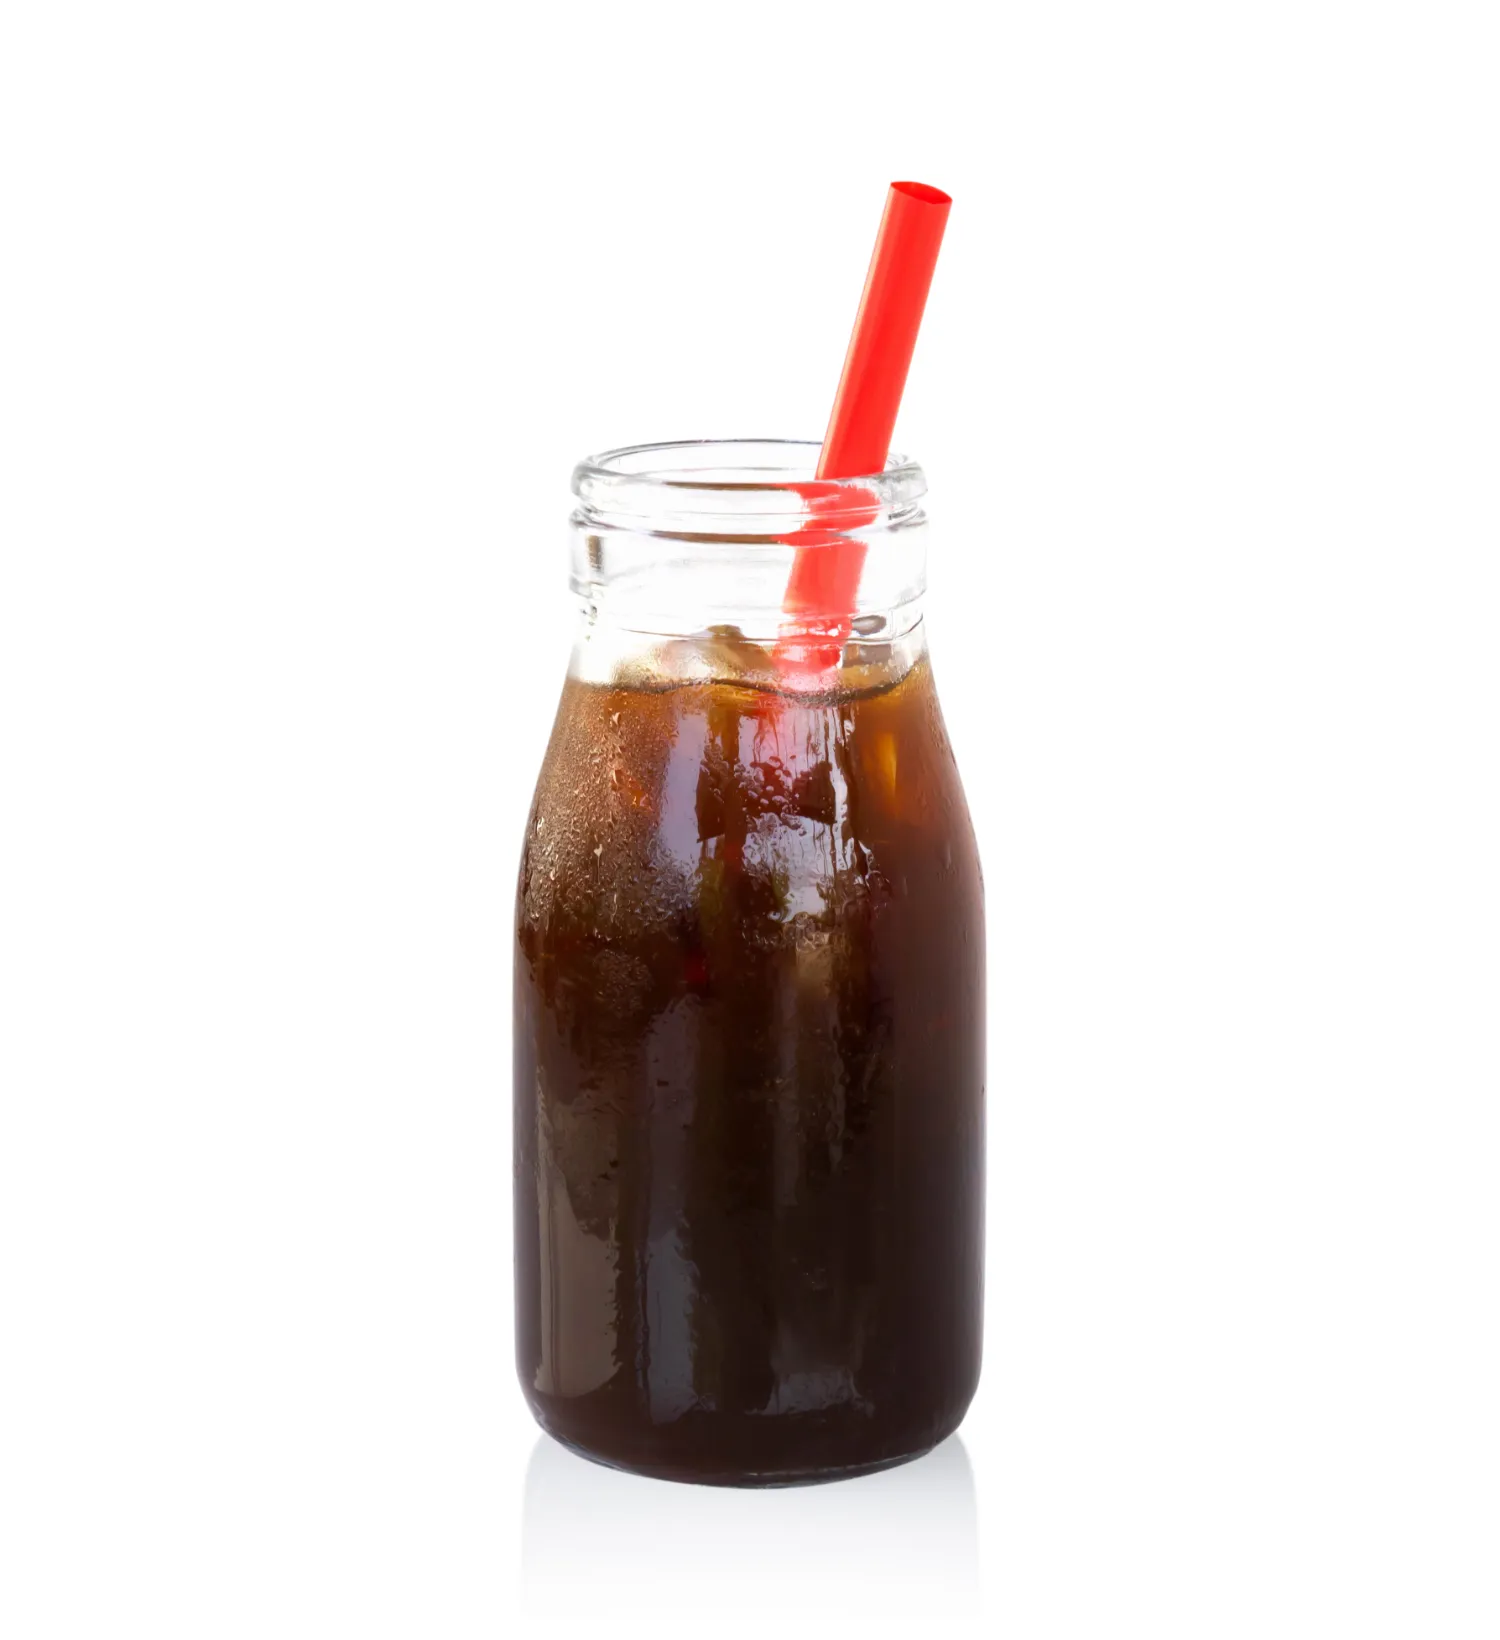 30701964 ice of americano in glass bottle isolated on white background